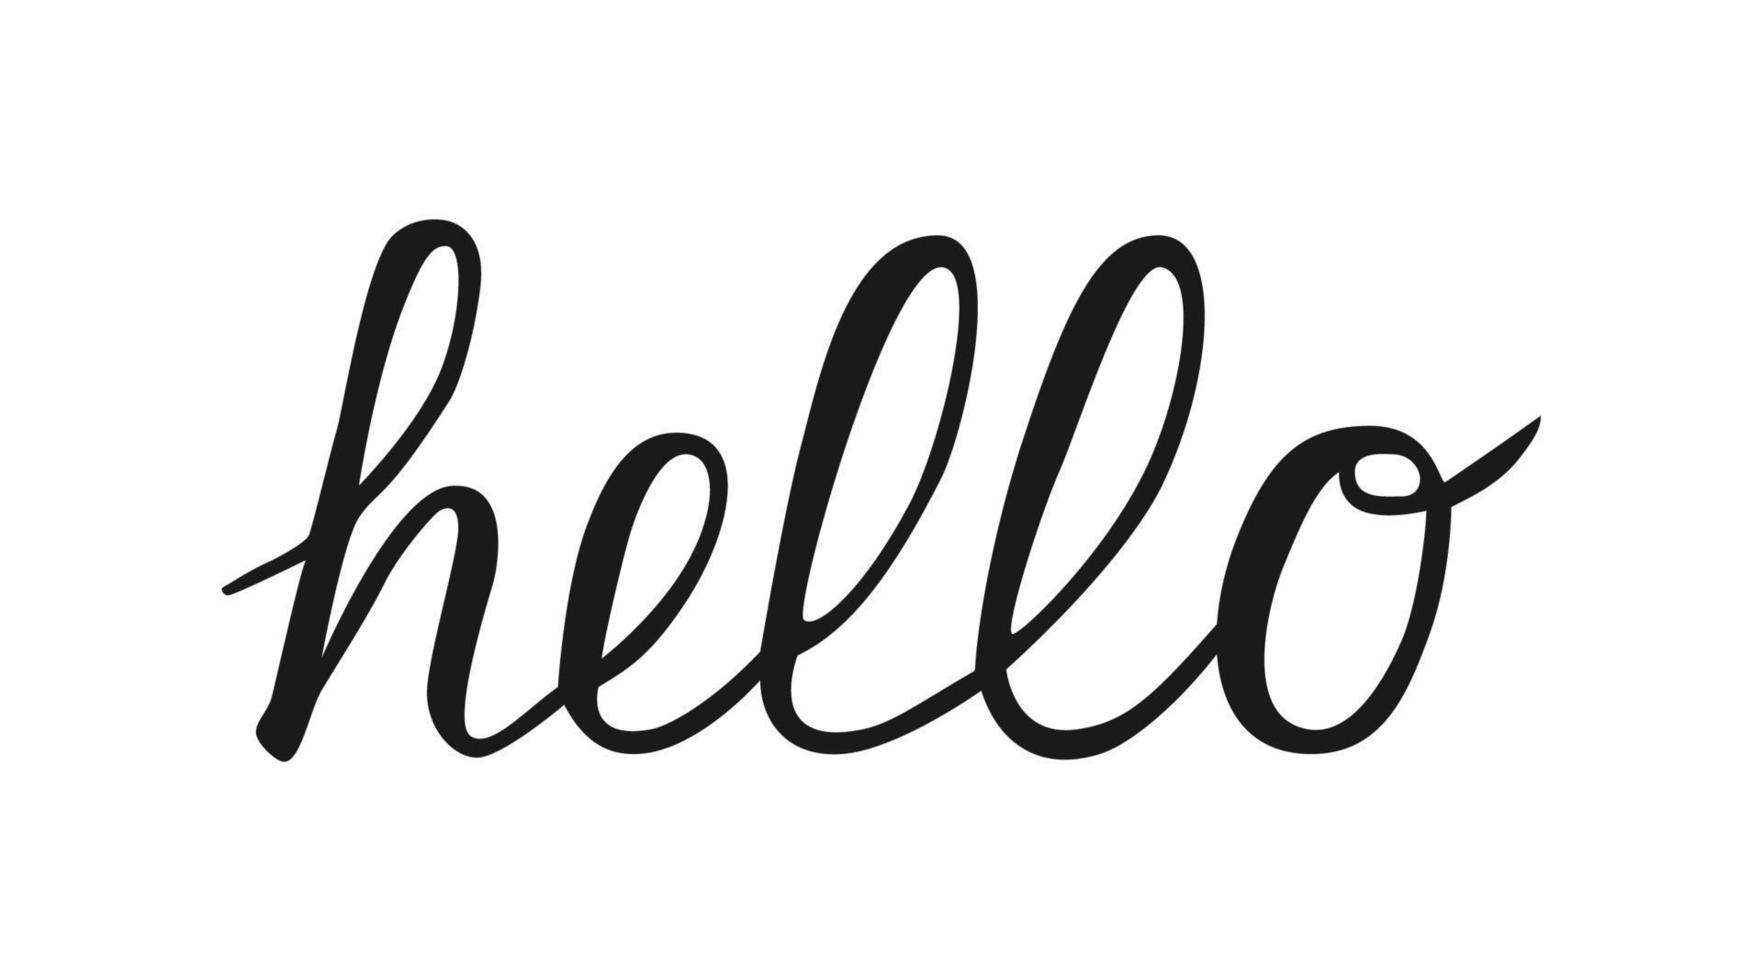 The word Hello is written by brush pen. Calligraphy font handwritten lettering isolated on white for t-shorts, banners, posters, websites, social media etc. vector